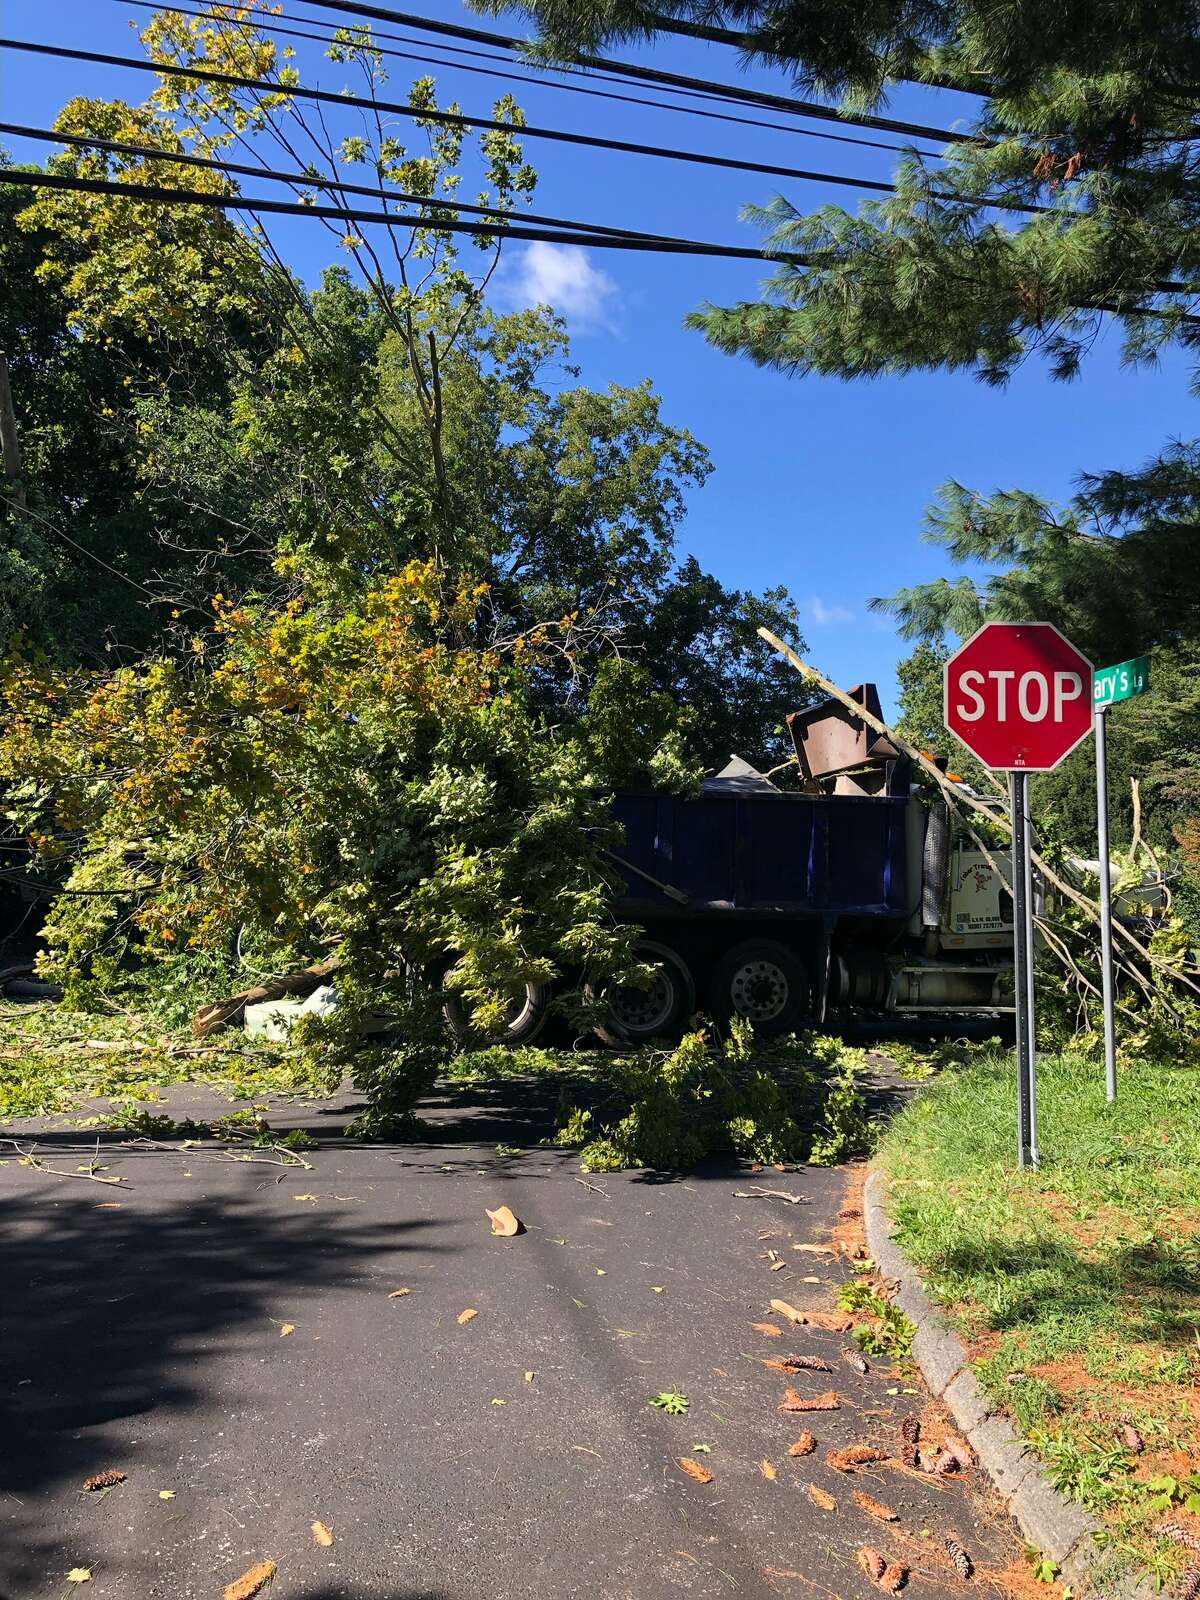 Police in Norwalk have closed a section of West Rocks Road after a tree fell on utility wires and a truck shortly before noon on Friday. Police said the driver was out of the vehicle. Close to 1,000 outages were reported in the city, according to Eversource.